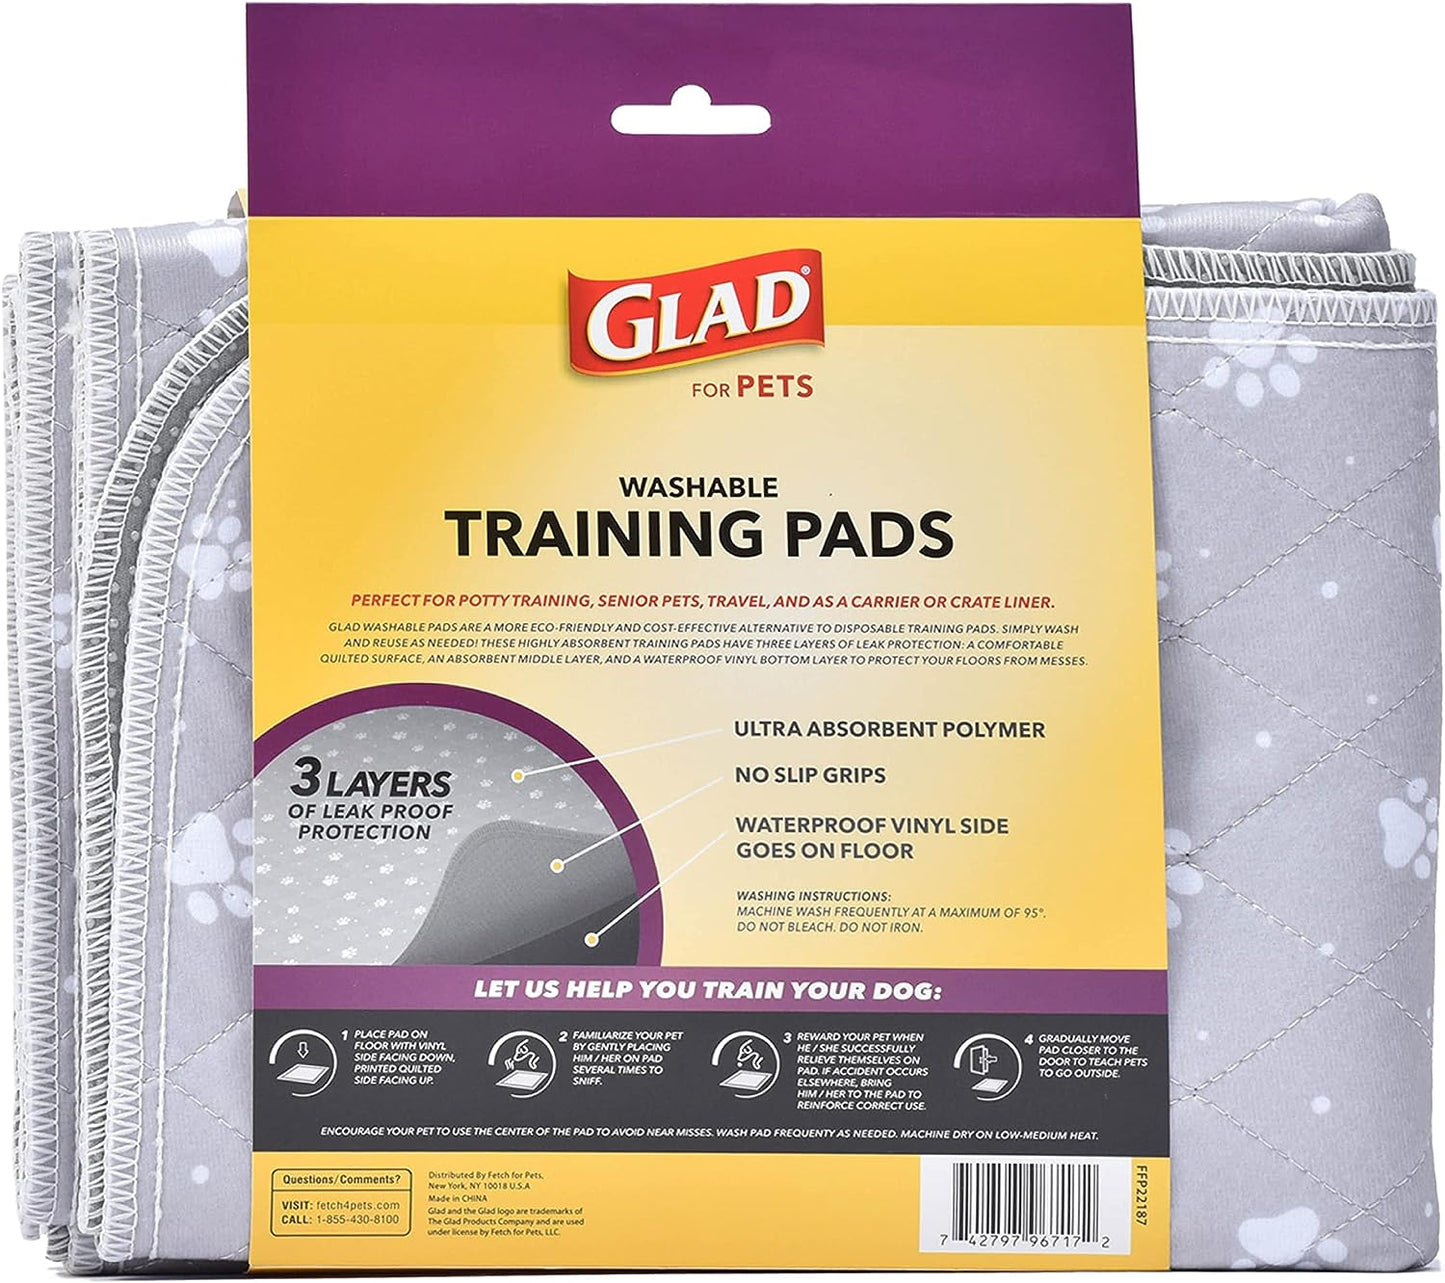 Glad for Pets Washable Training Pads, Medium Size (24”x36”), 2 Pack Gray with Paw Prints| Re-usable Cloth Dog Training Pads with 3 Layers of Leak Protection and No Slip Grip Vinyl Bottom